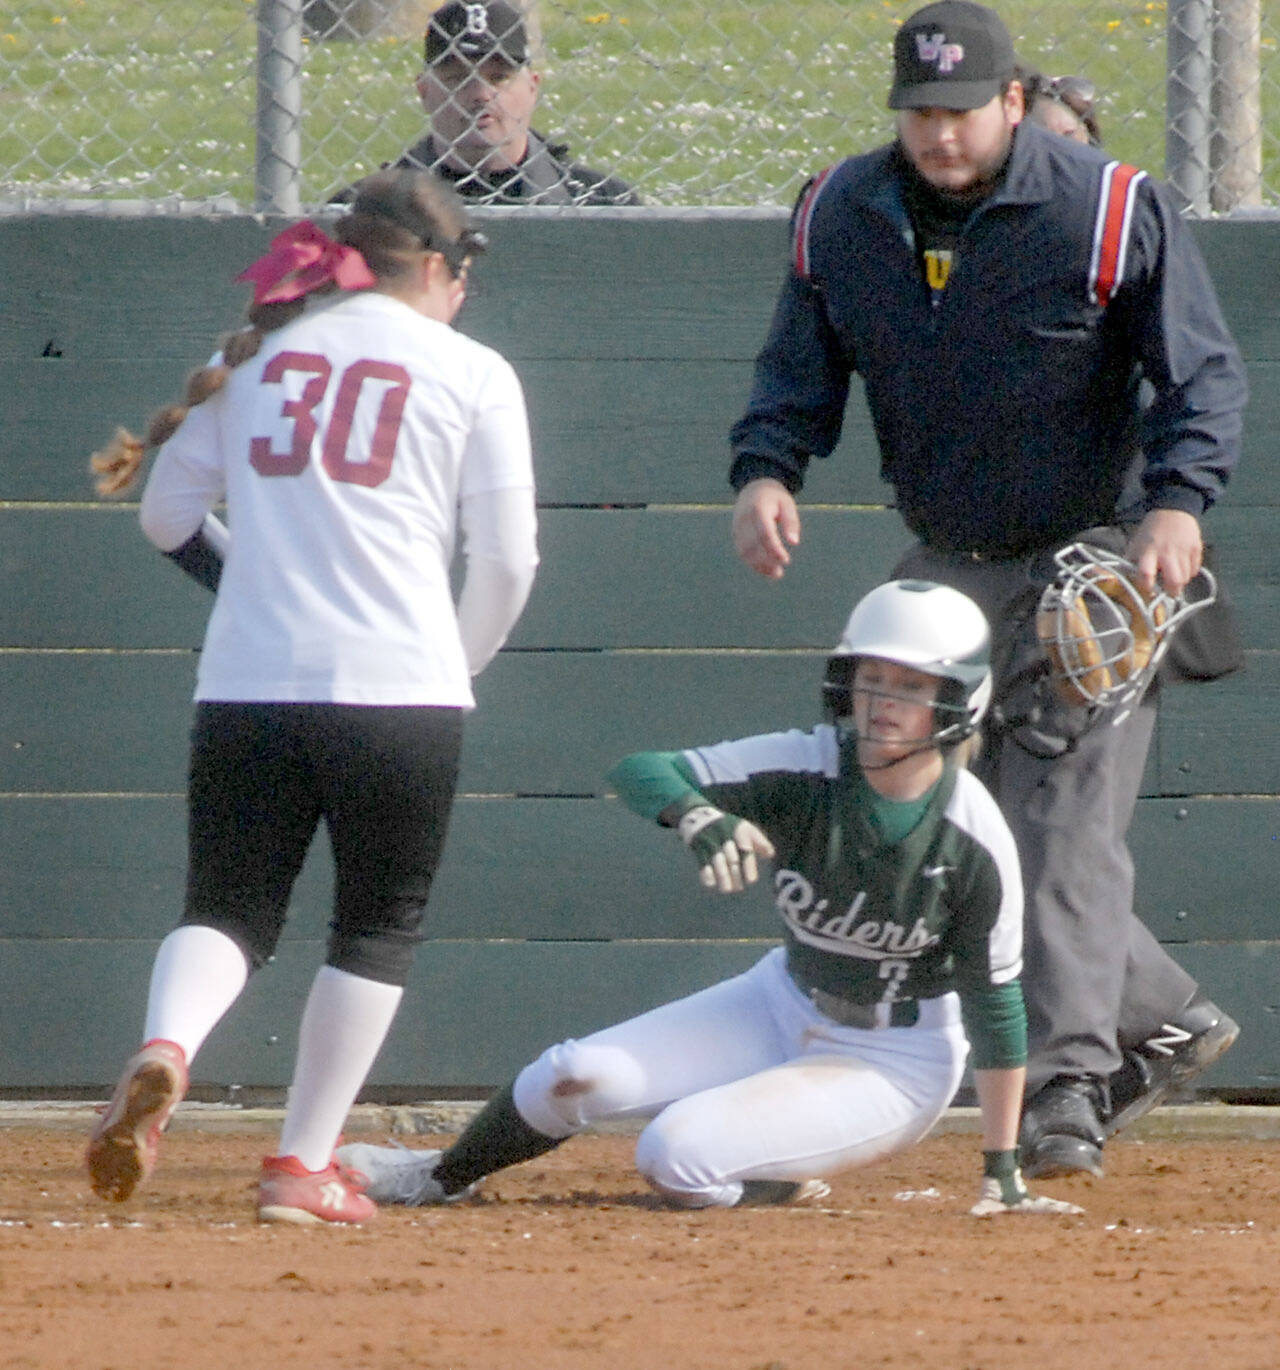 Port Angeles baserunner Peyton Rudd looks towards Kingston pitcher Jayla Moon while stealing home after a wild pitch got away from the catcher during a game earlier this season. (Keith Thorpe/Peninsula Daily News)